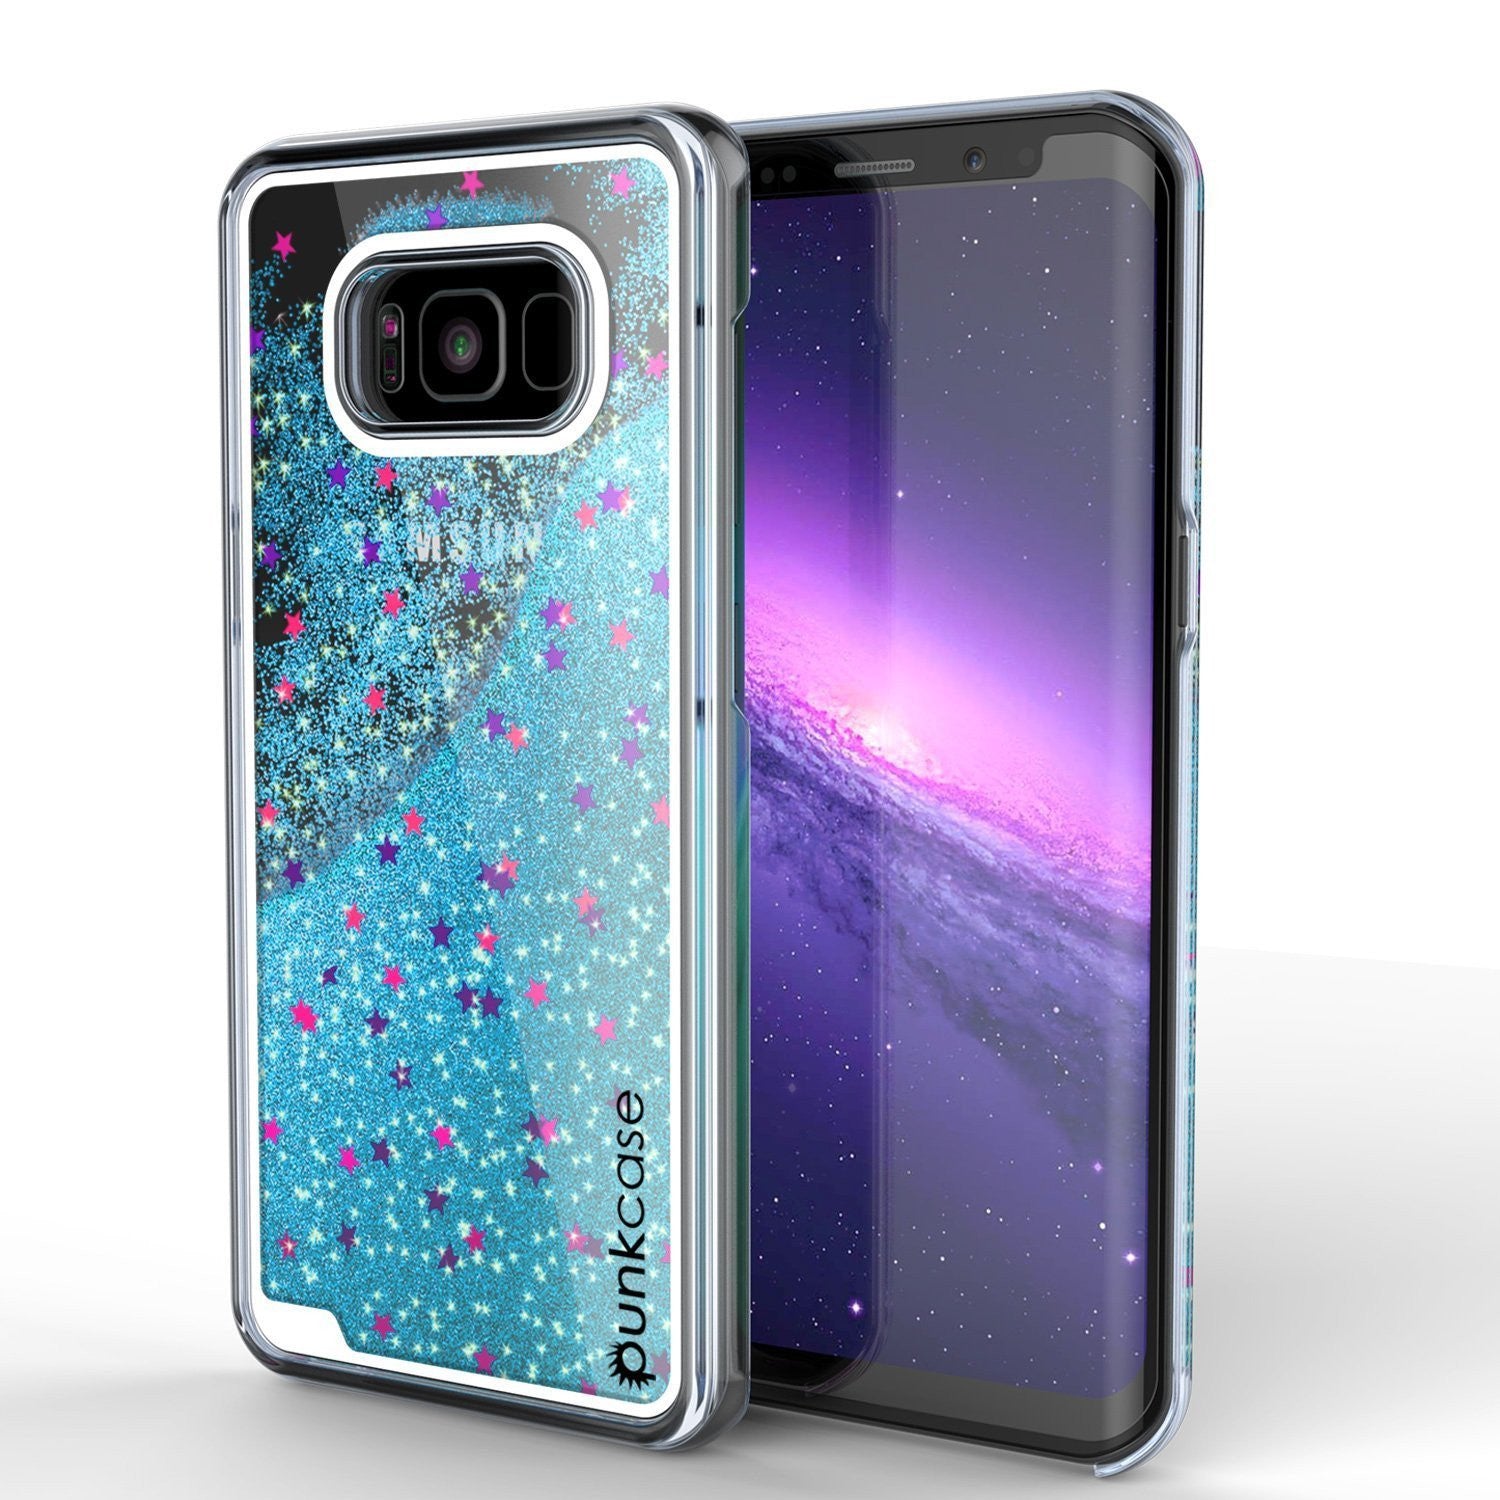 Galaxy S8 Plus Case, Punkcase [Liquid Series] Protective Dual Layer Floating Glitter Cover + PunkShield Screen Protector for Samsung S8 [Teal] (Color in image: Teal)